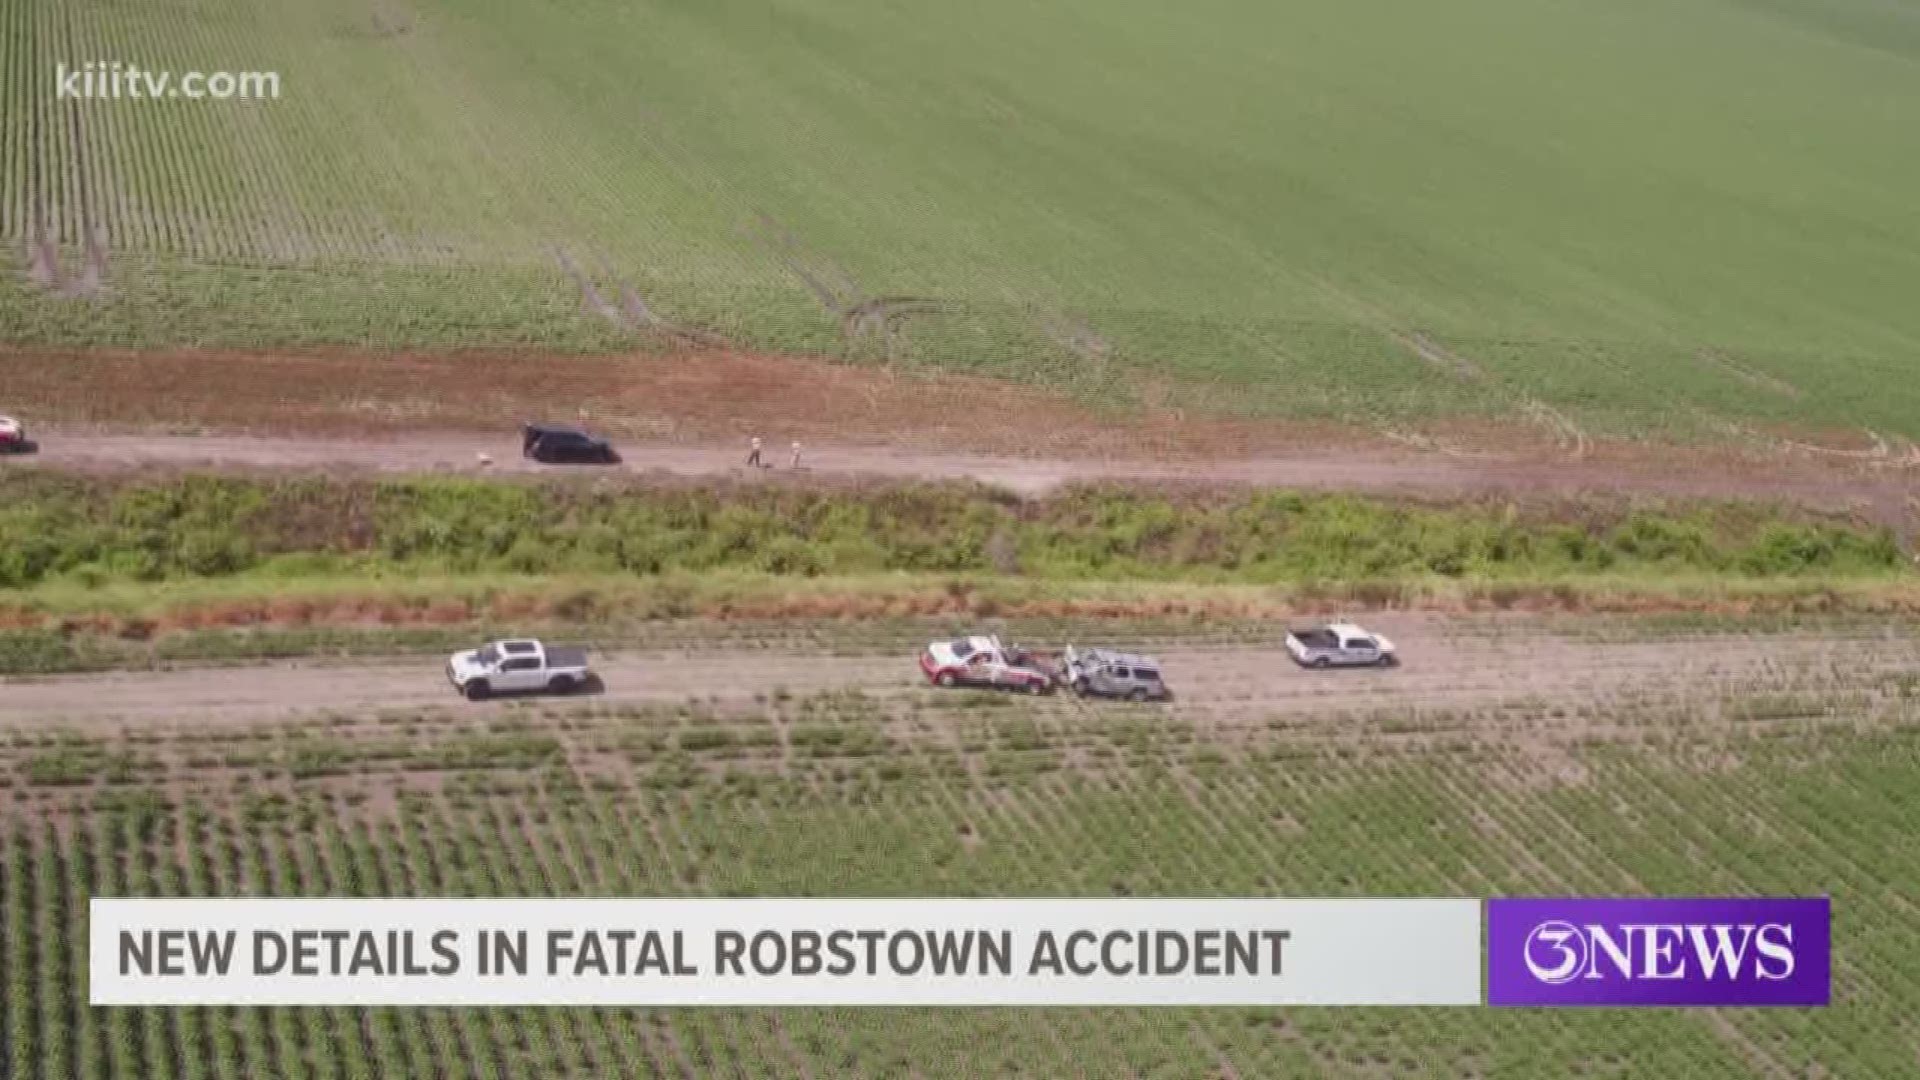 Several agencies were called to the scene of a fatal accident near Robstown, Texas, Wednesday morning that left six undocumented immigrants dead and several injured.